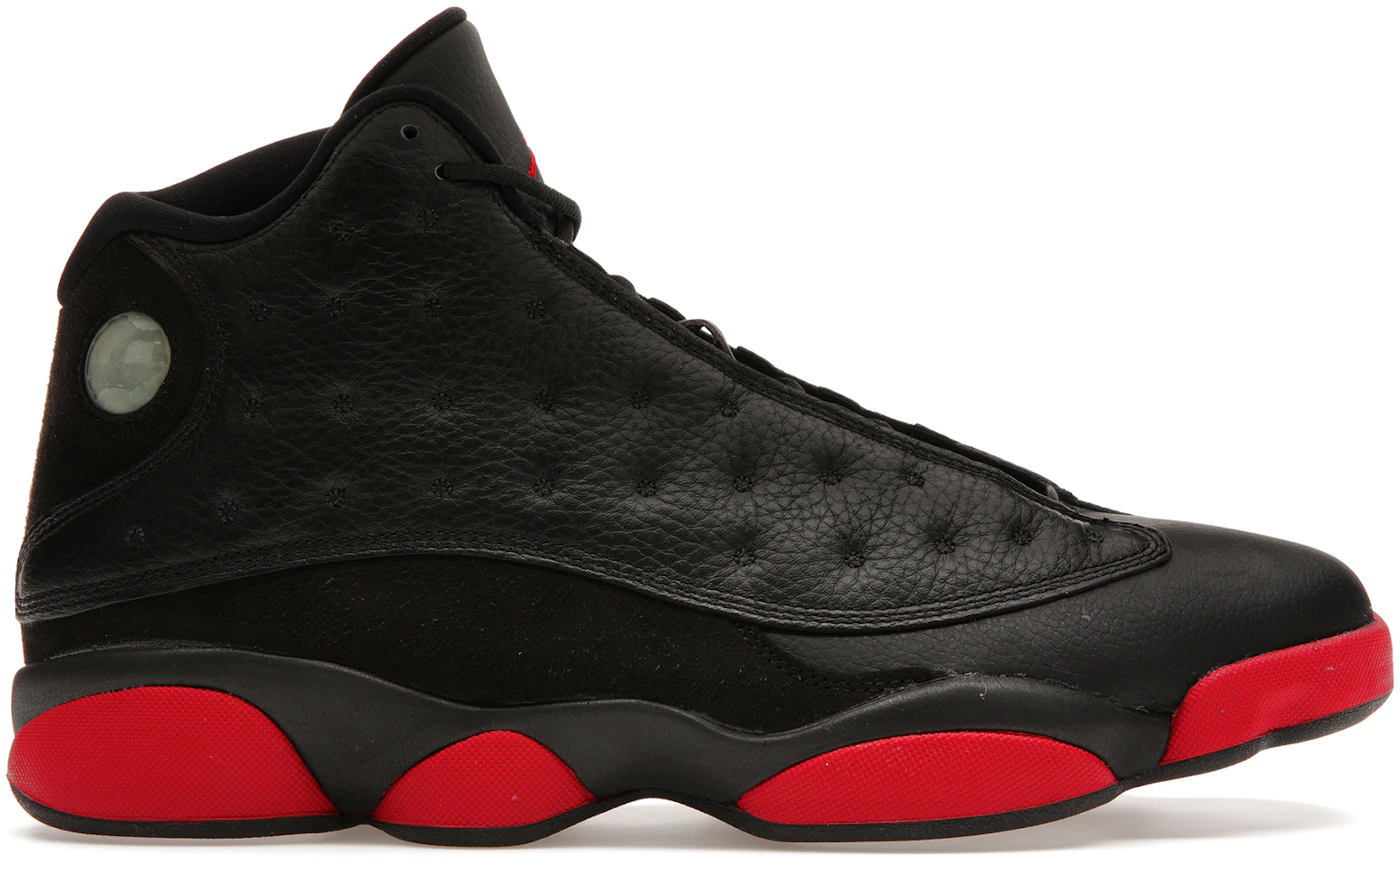 LV Air Jordan 13 Red Shoes Limited